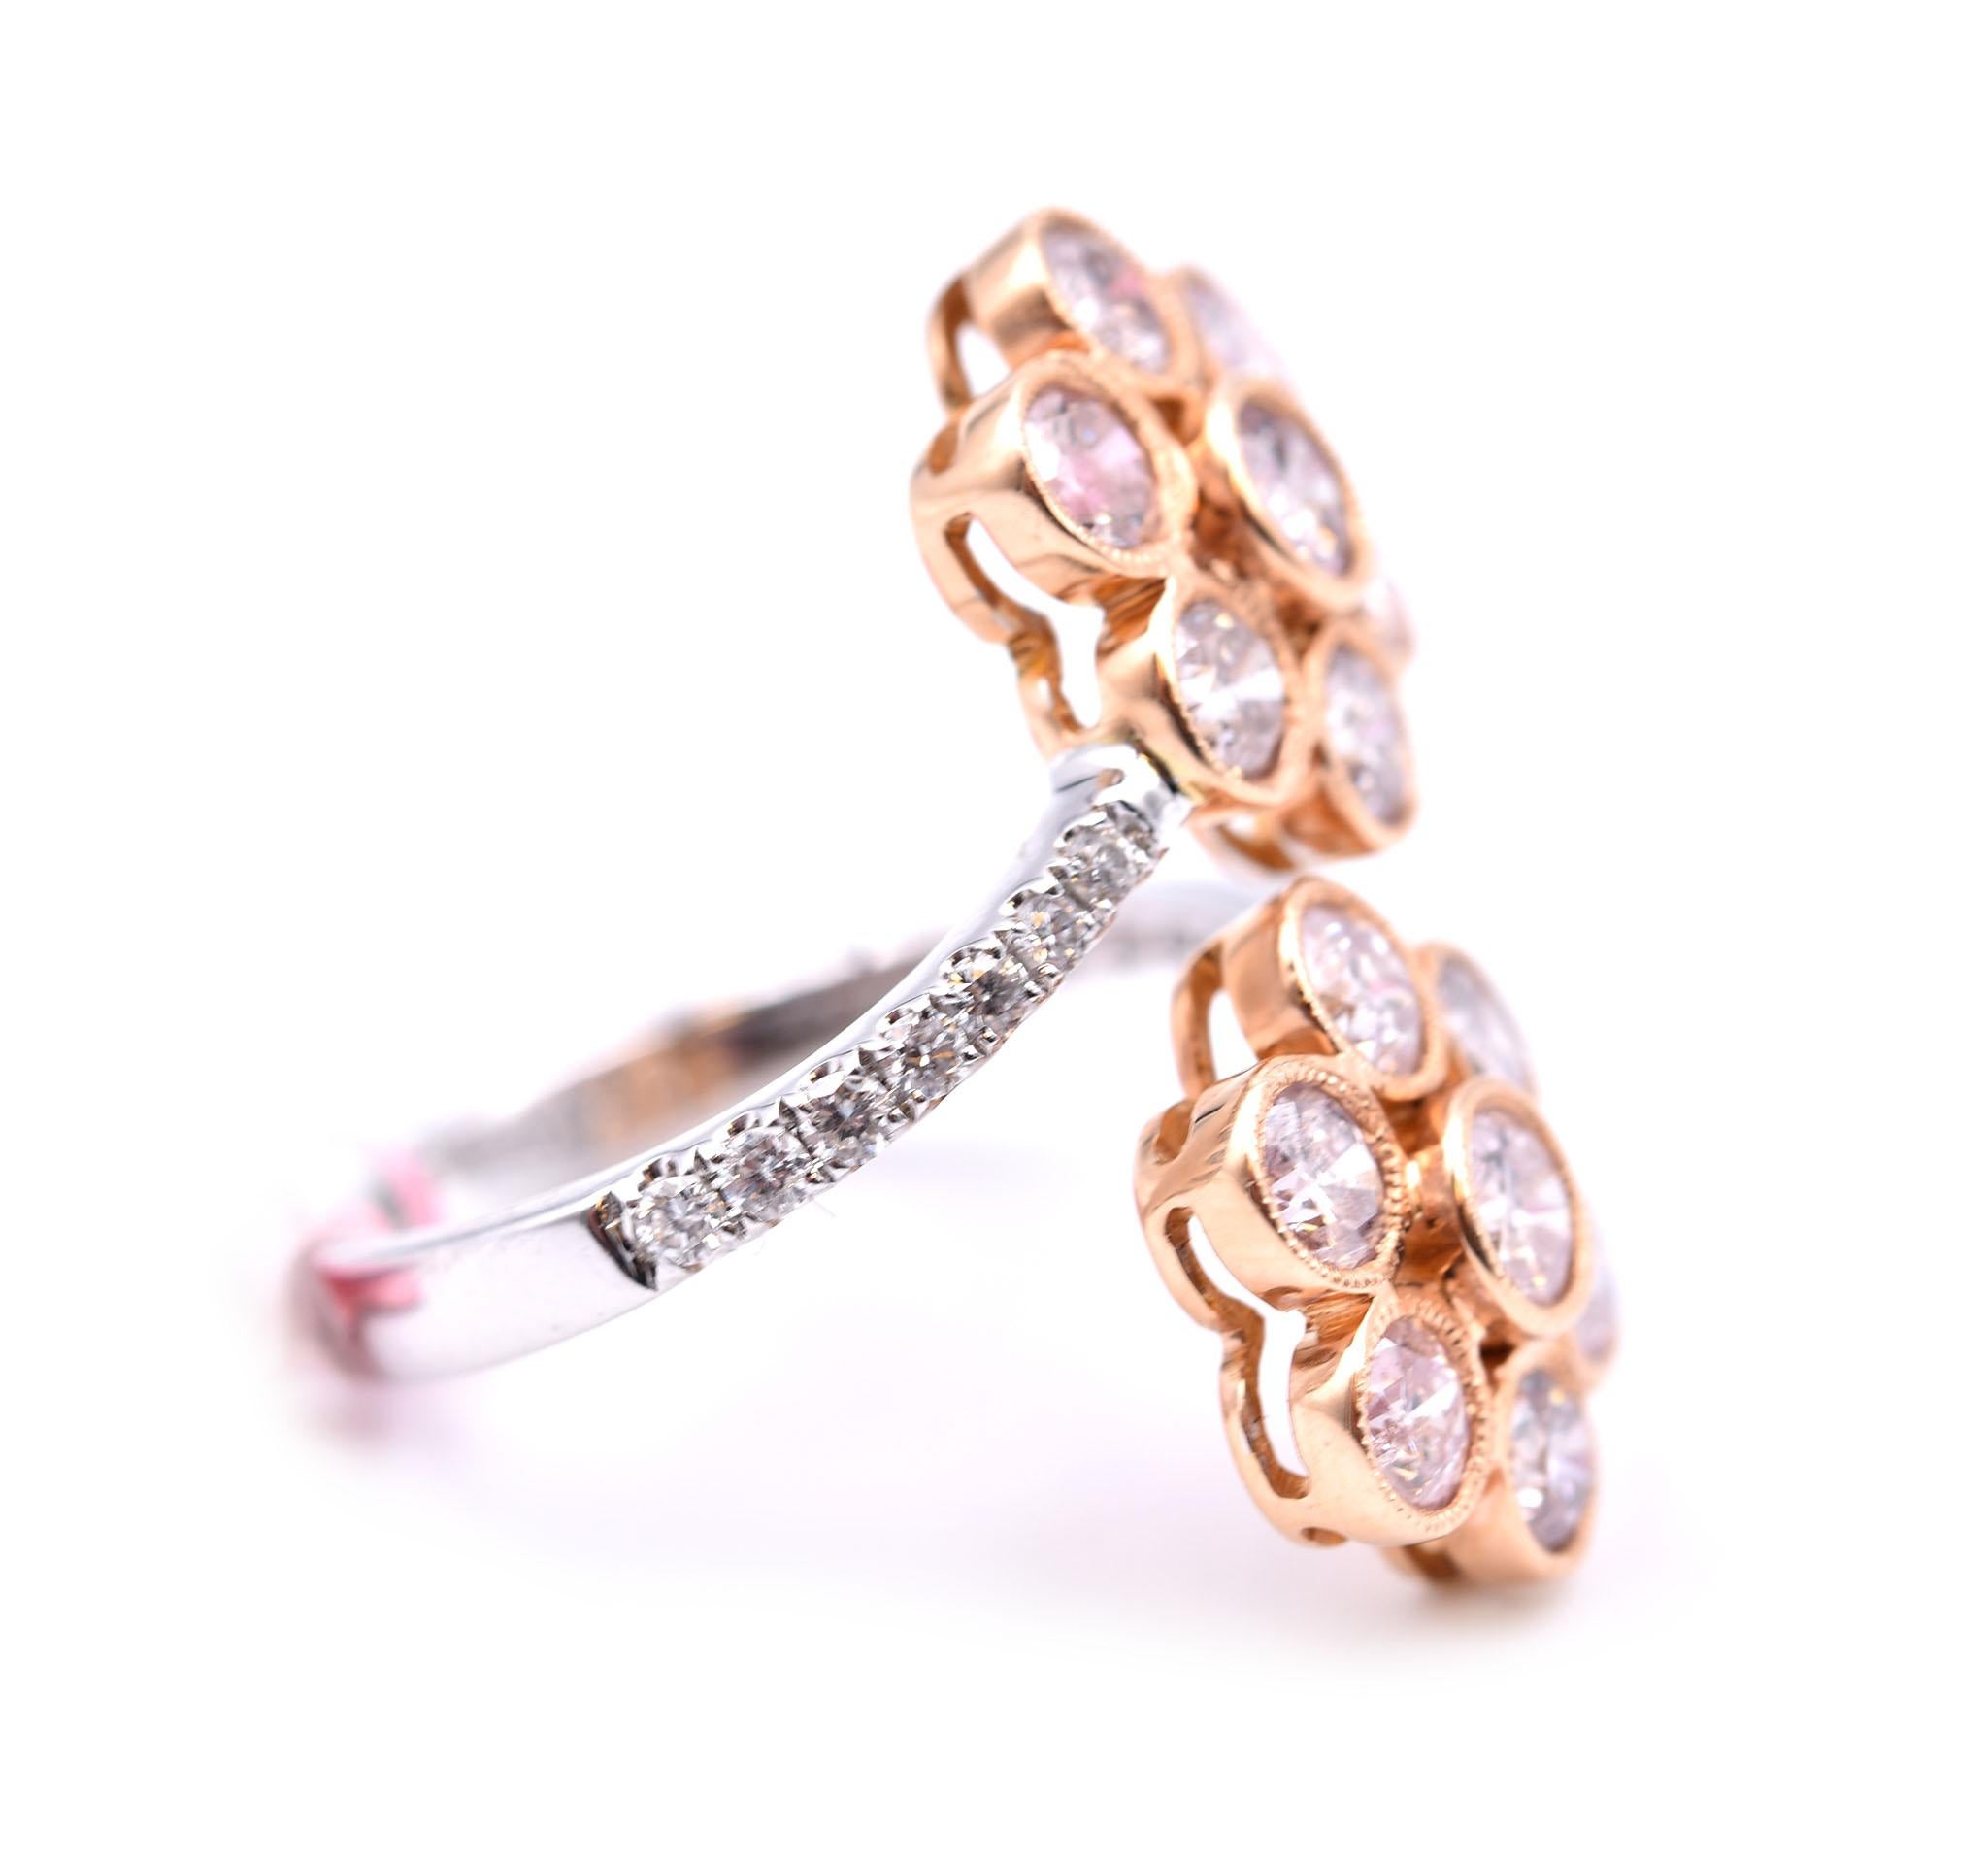 Designer: custom design
Material: 18k white and rose gold
Pink Diamonds: 14 round brilliant cut = 2.37cttw
Color: pink
Diamonds: 14 round brilliant cut = .20cttw
Color: G
Clarity: VS 
Size: 7 (please allow two additional shipping days for sizing